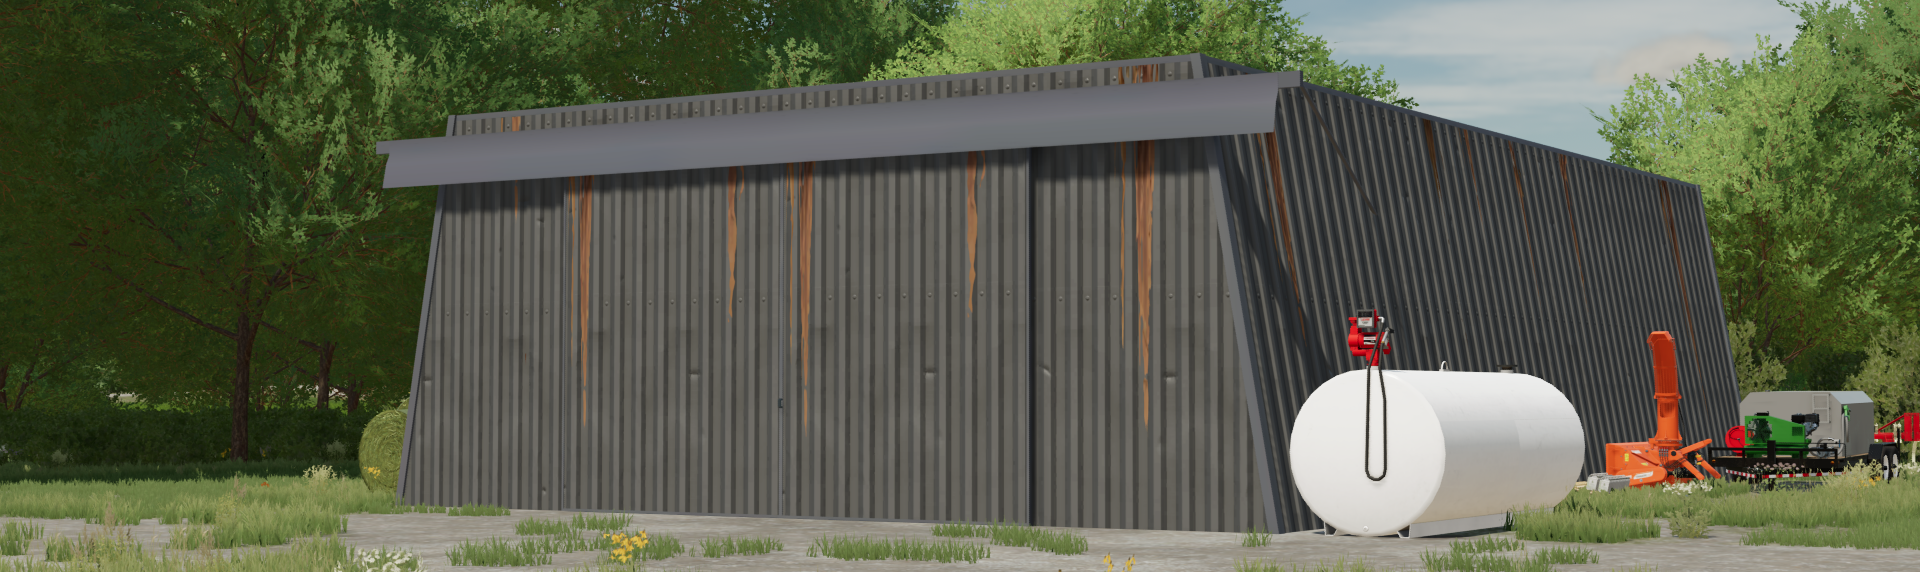 50x75 Cold Storage Shed